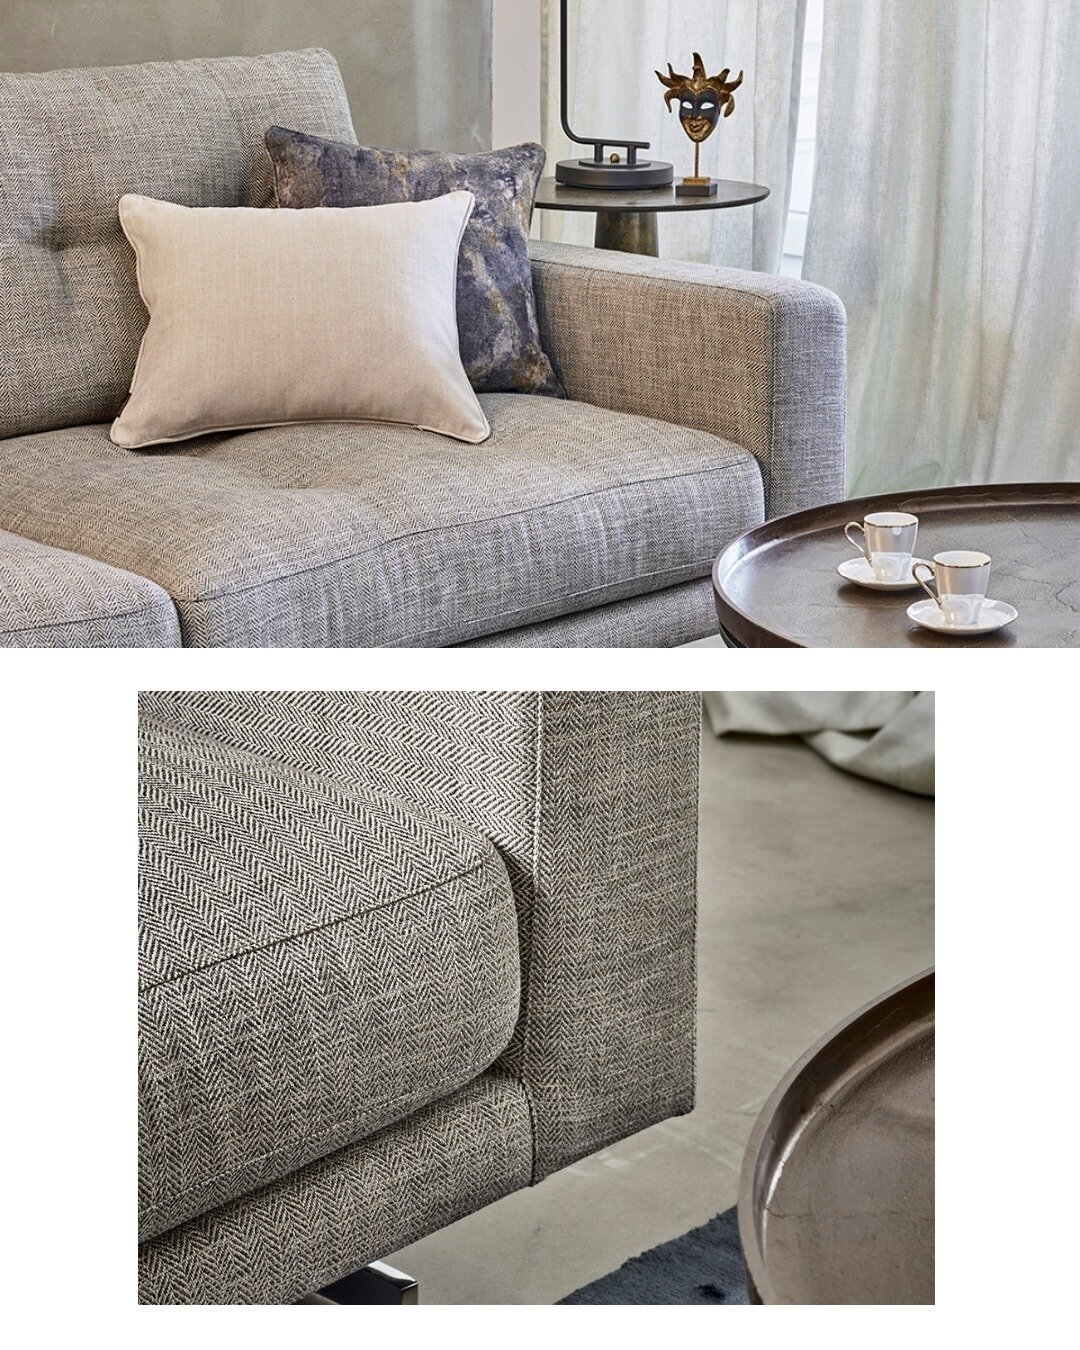 DANTE

The Dante range is an easy clean and water repellent fabric that is suitable for upholstered furniture, curtains and soft furnishings.

The Dante range comprises of SIX different colours all in the herringbone design.

There is more informatio